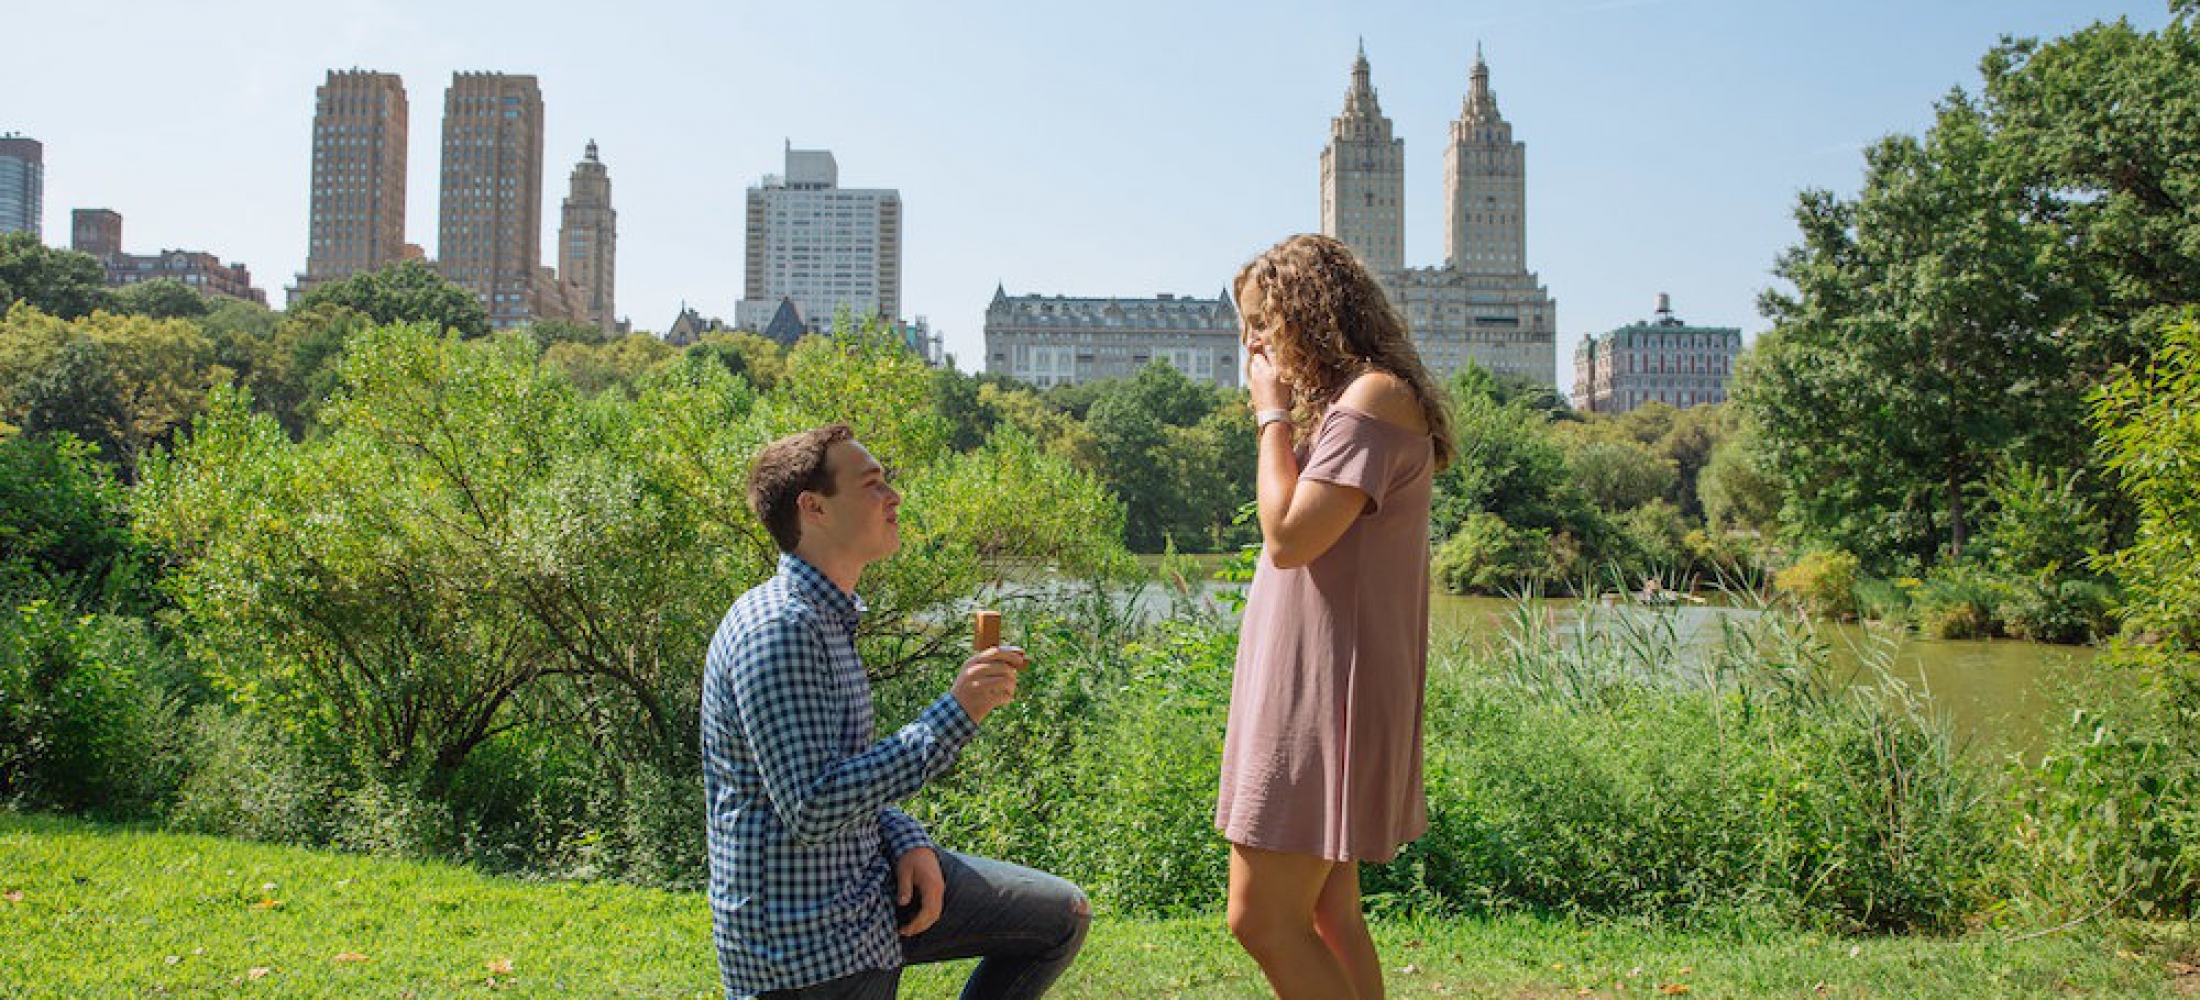 Central Park Creative And Romantic Proposal Ideas Our Unique Packages Show All The Best Ways